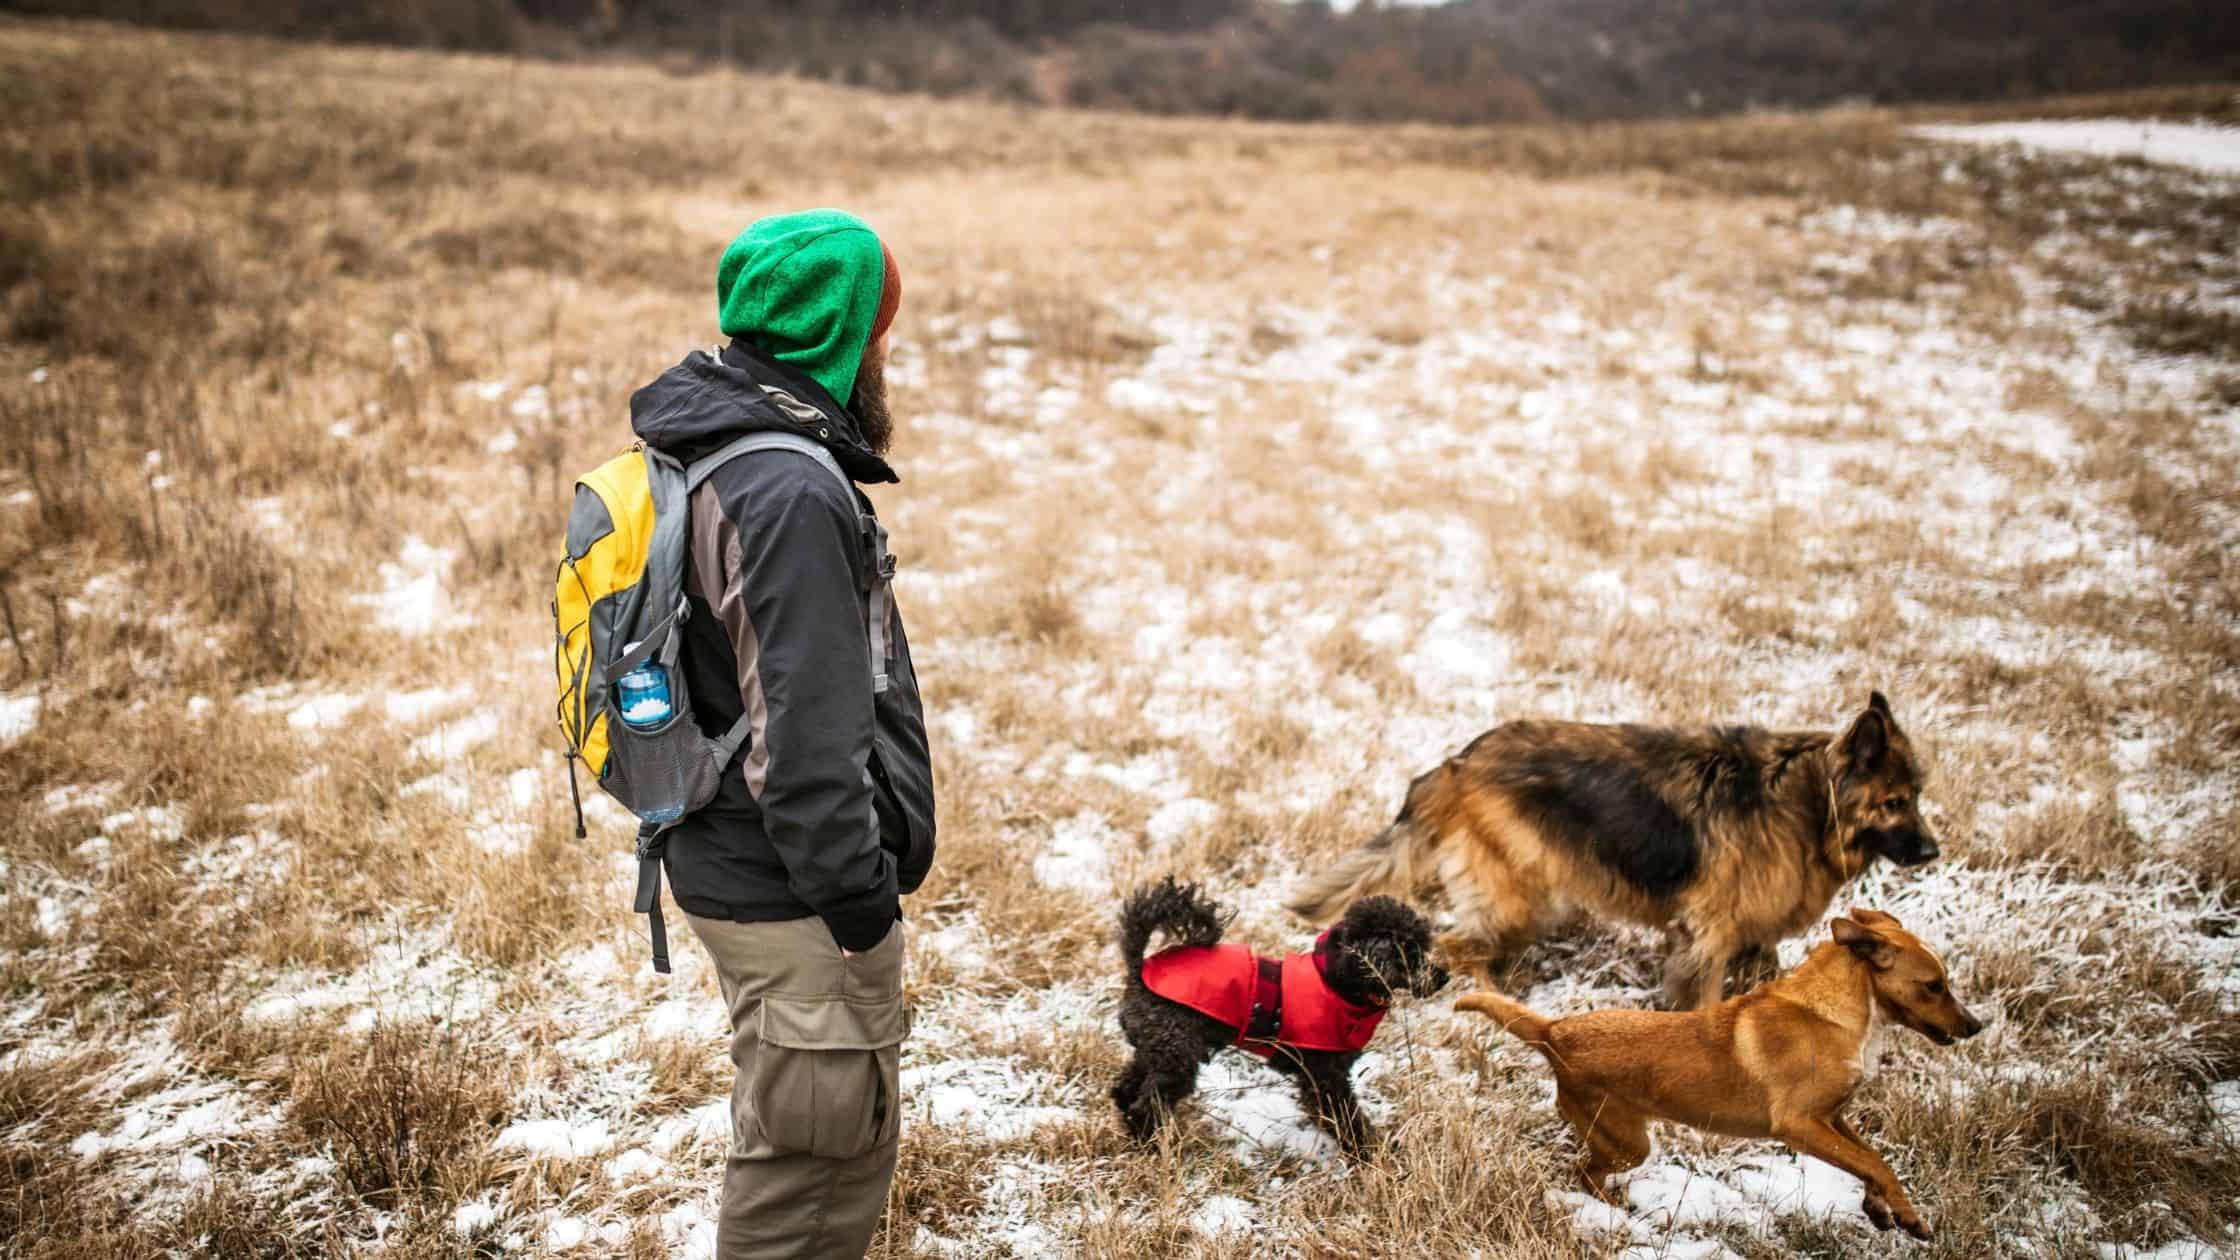 Tips for when you go hiking with dogs